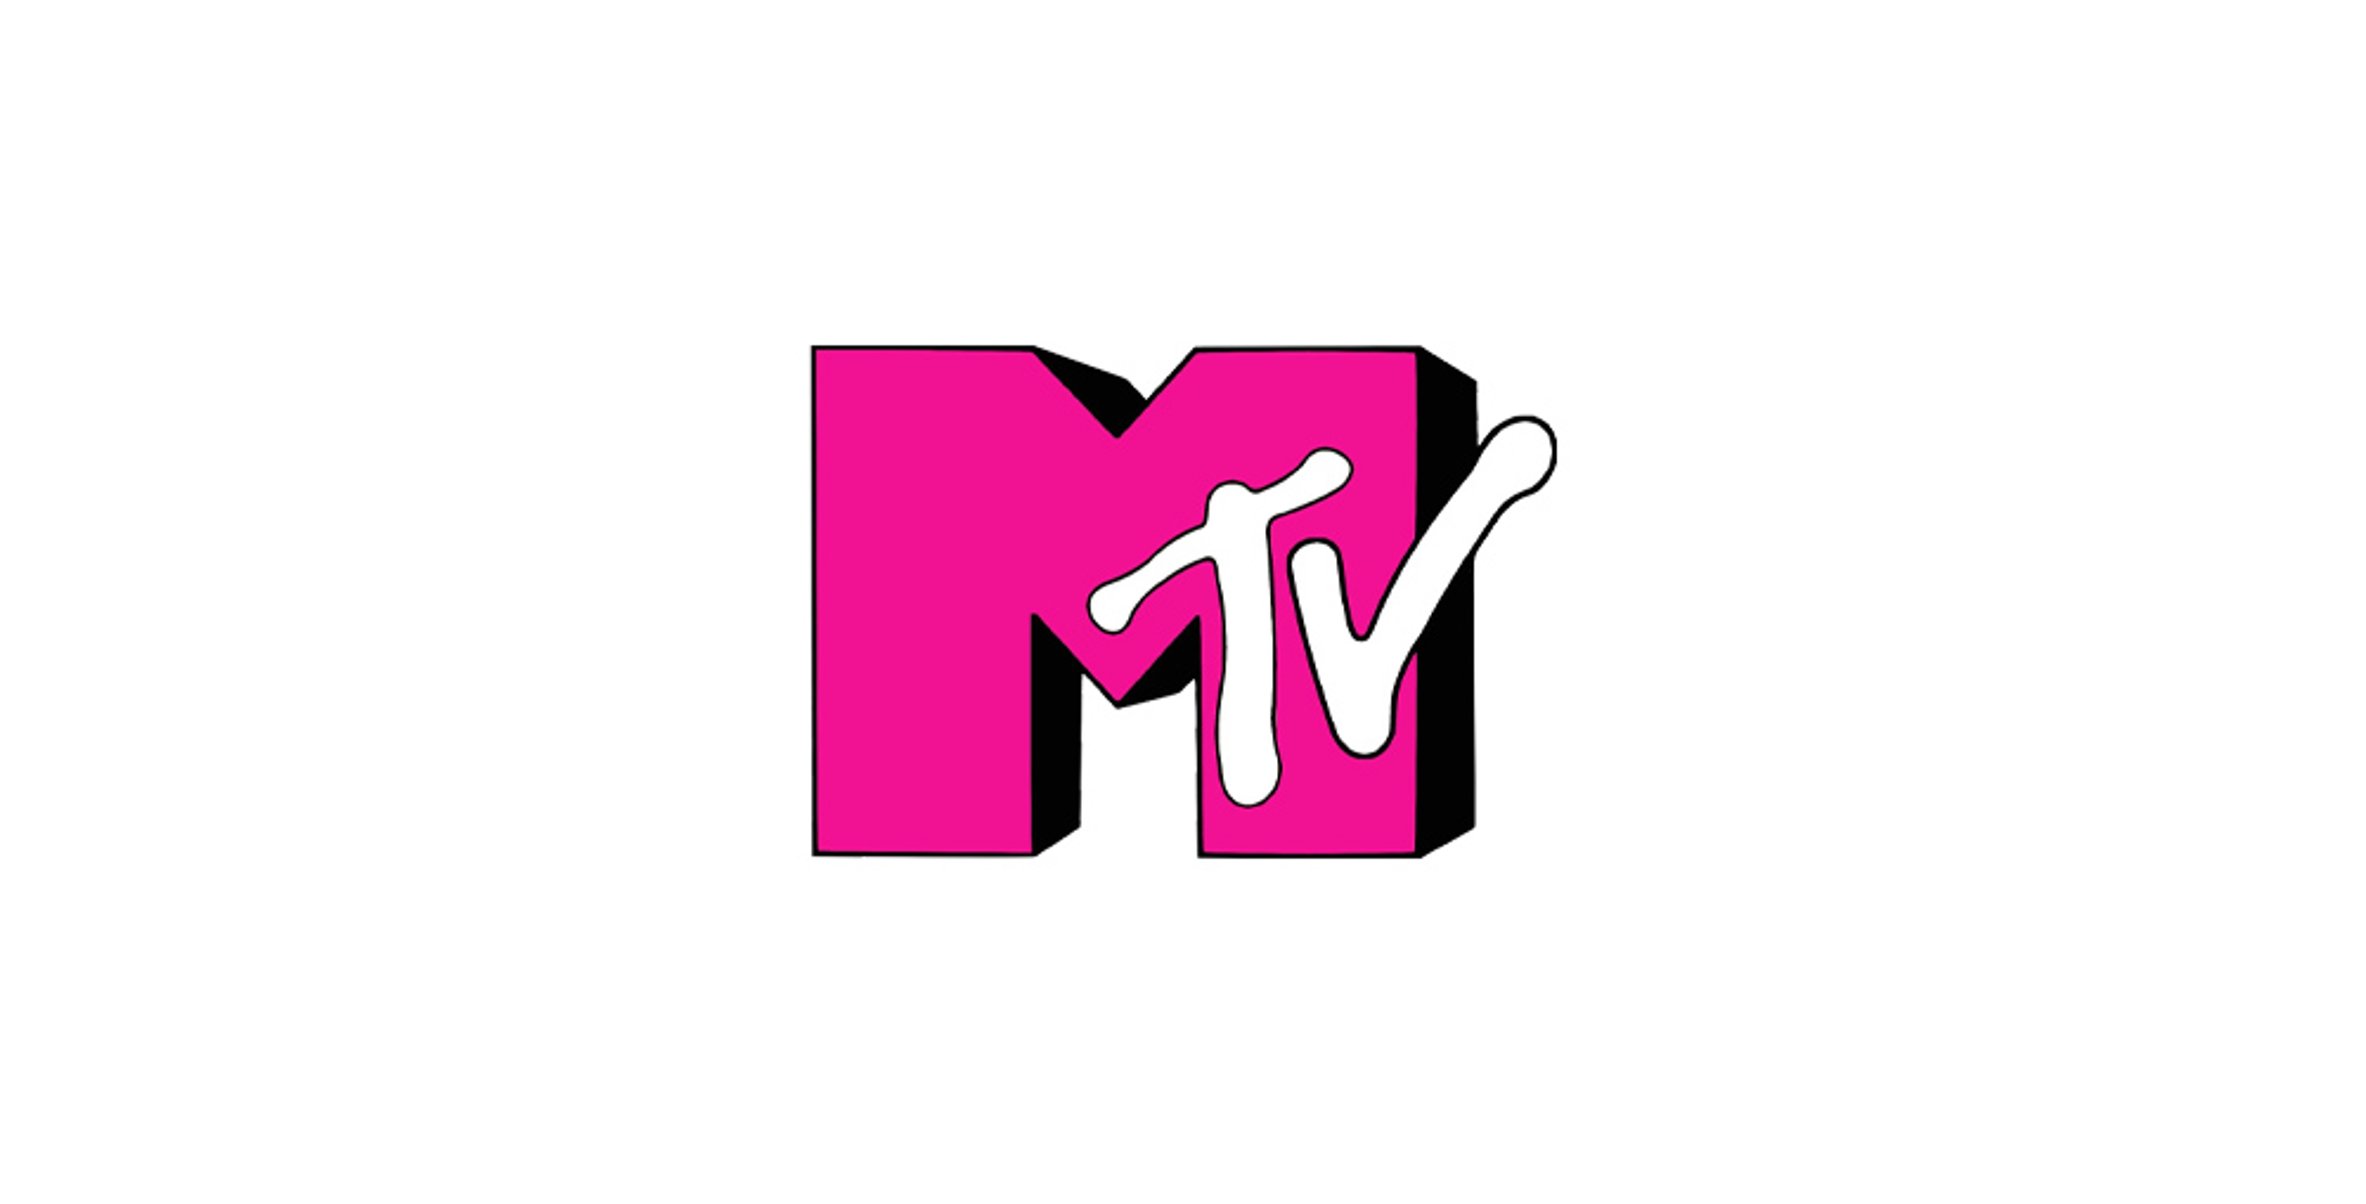 Seeking Performers For MTV's Making the Band